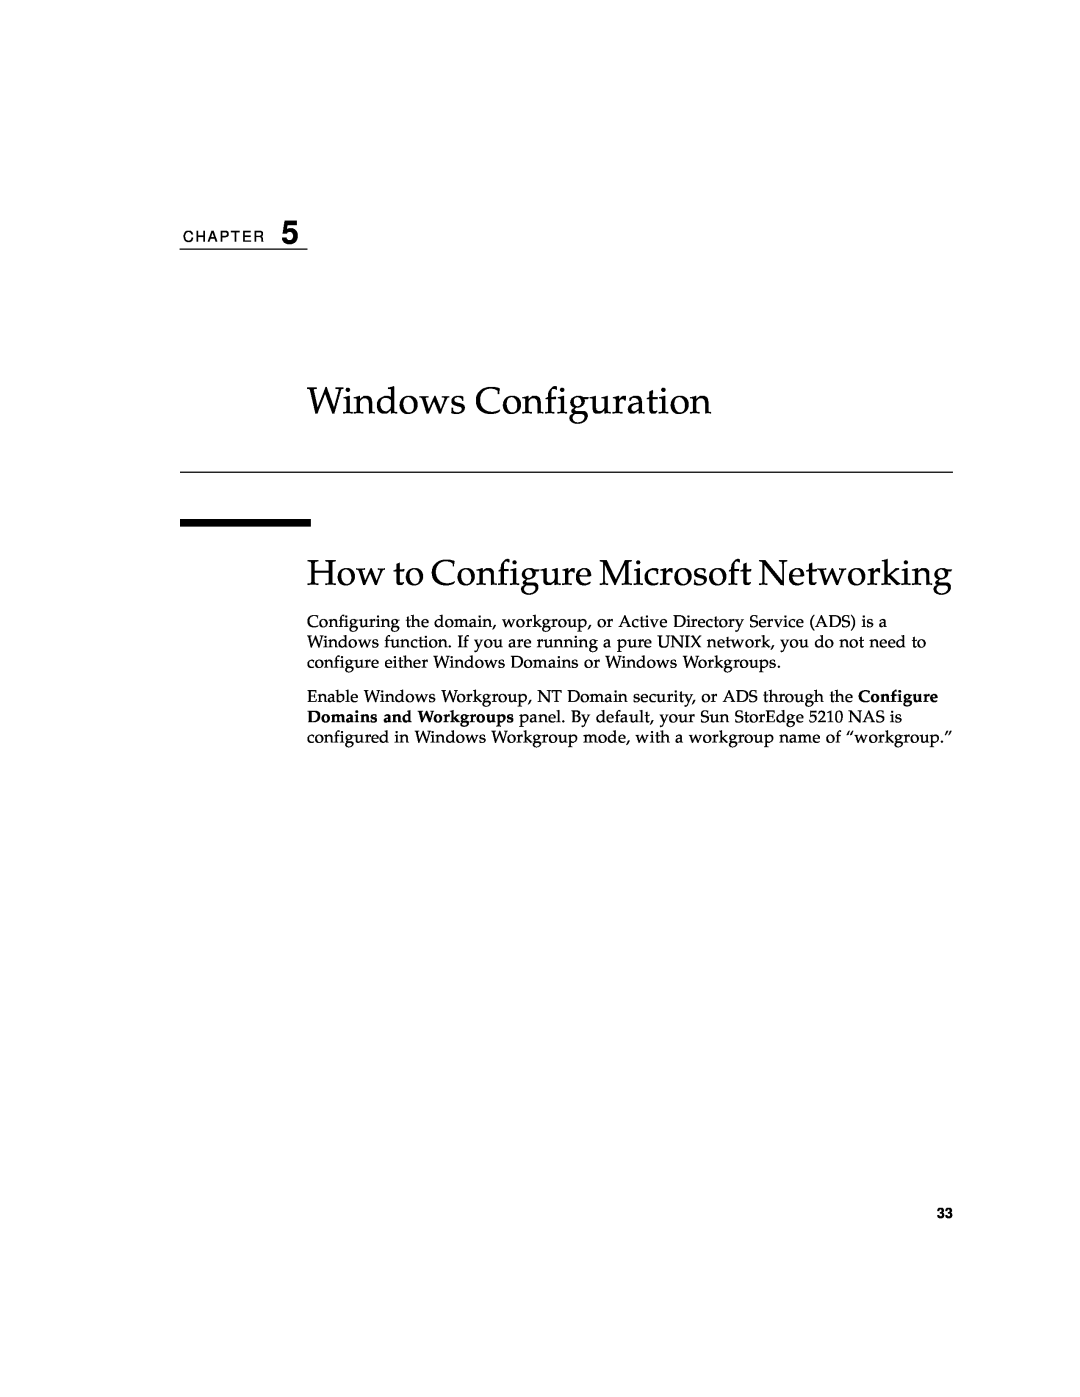 Sun Microsystems 5210 NAS manual Windows Configuration, How to Configure Microsoft Networking 